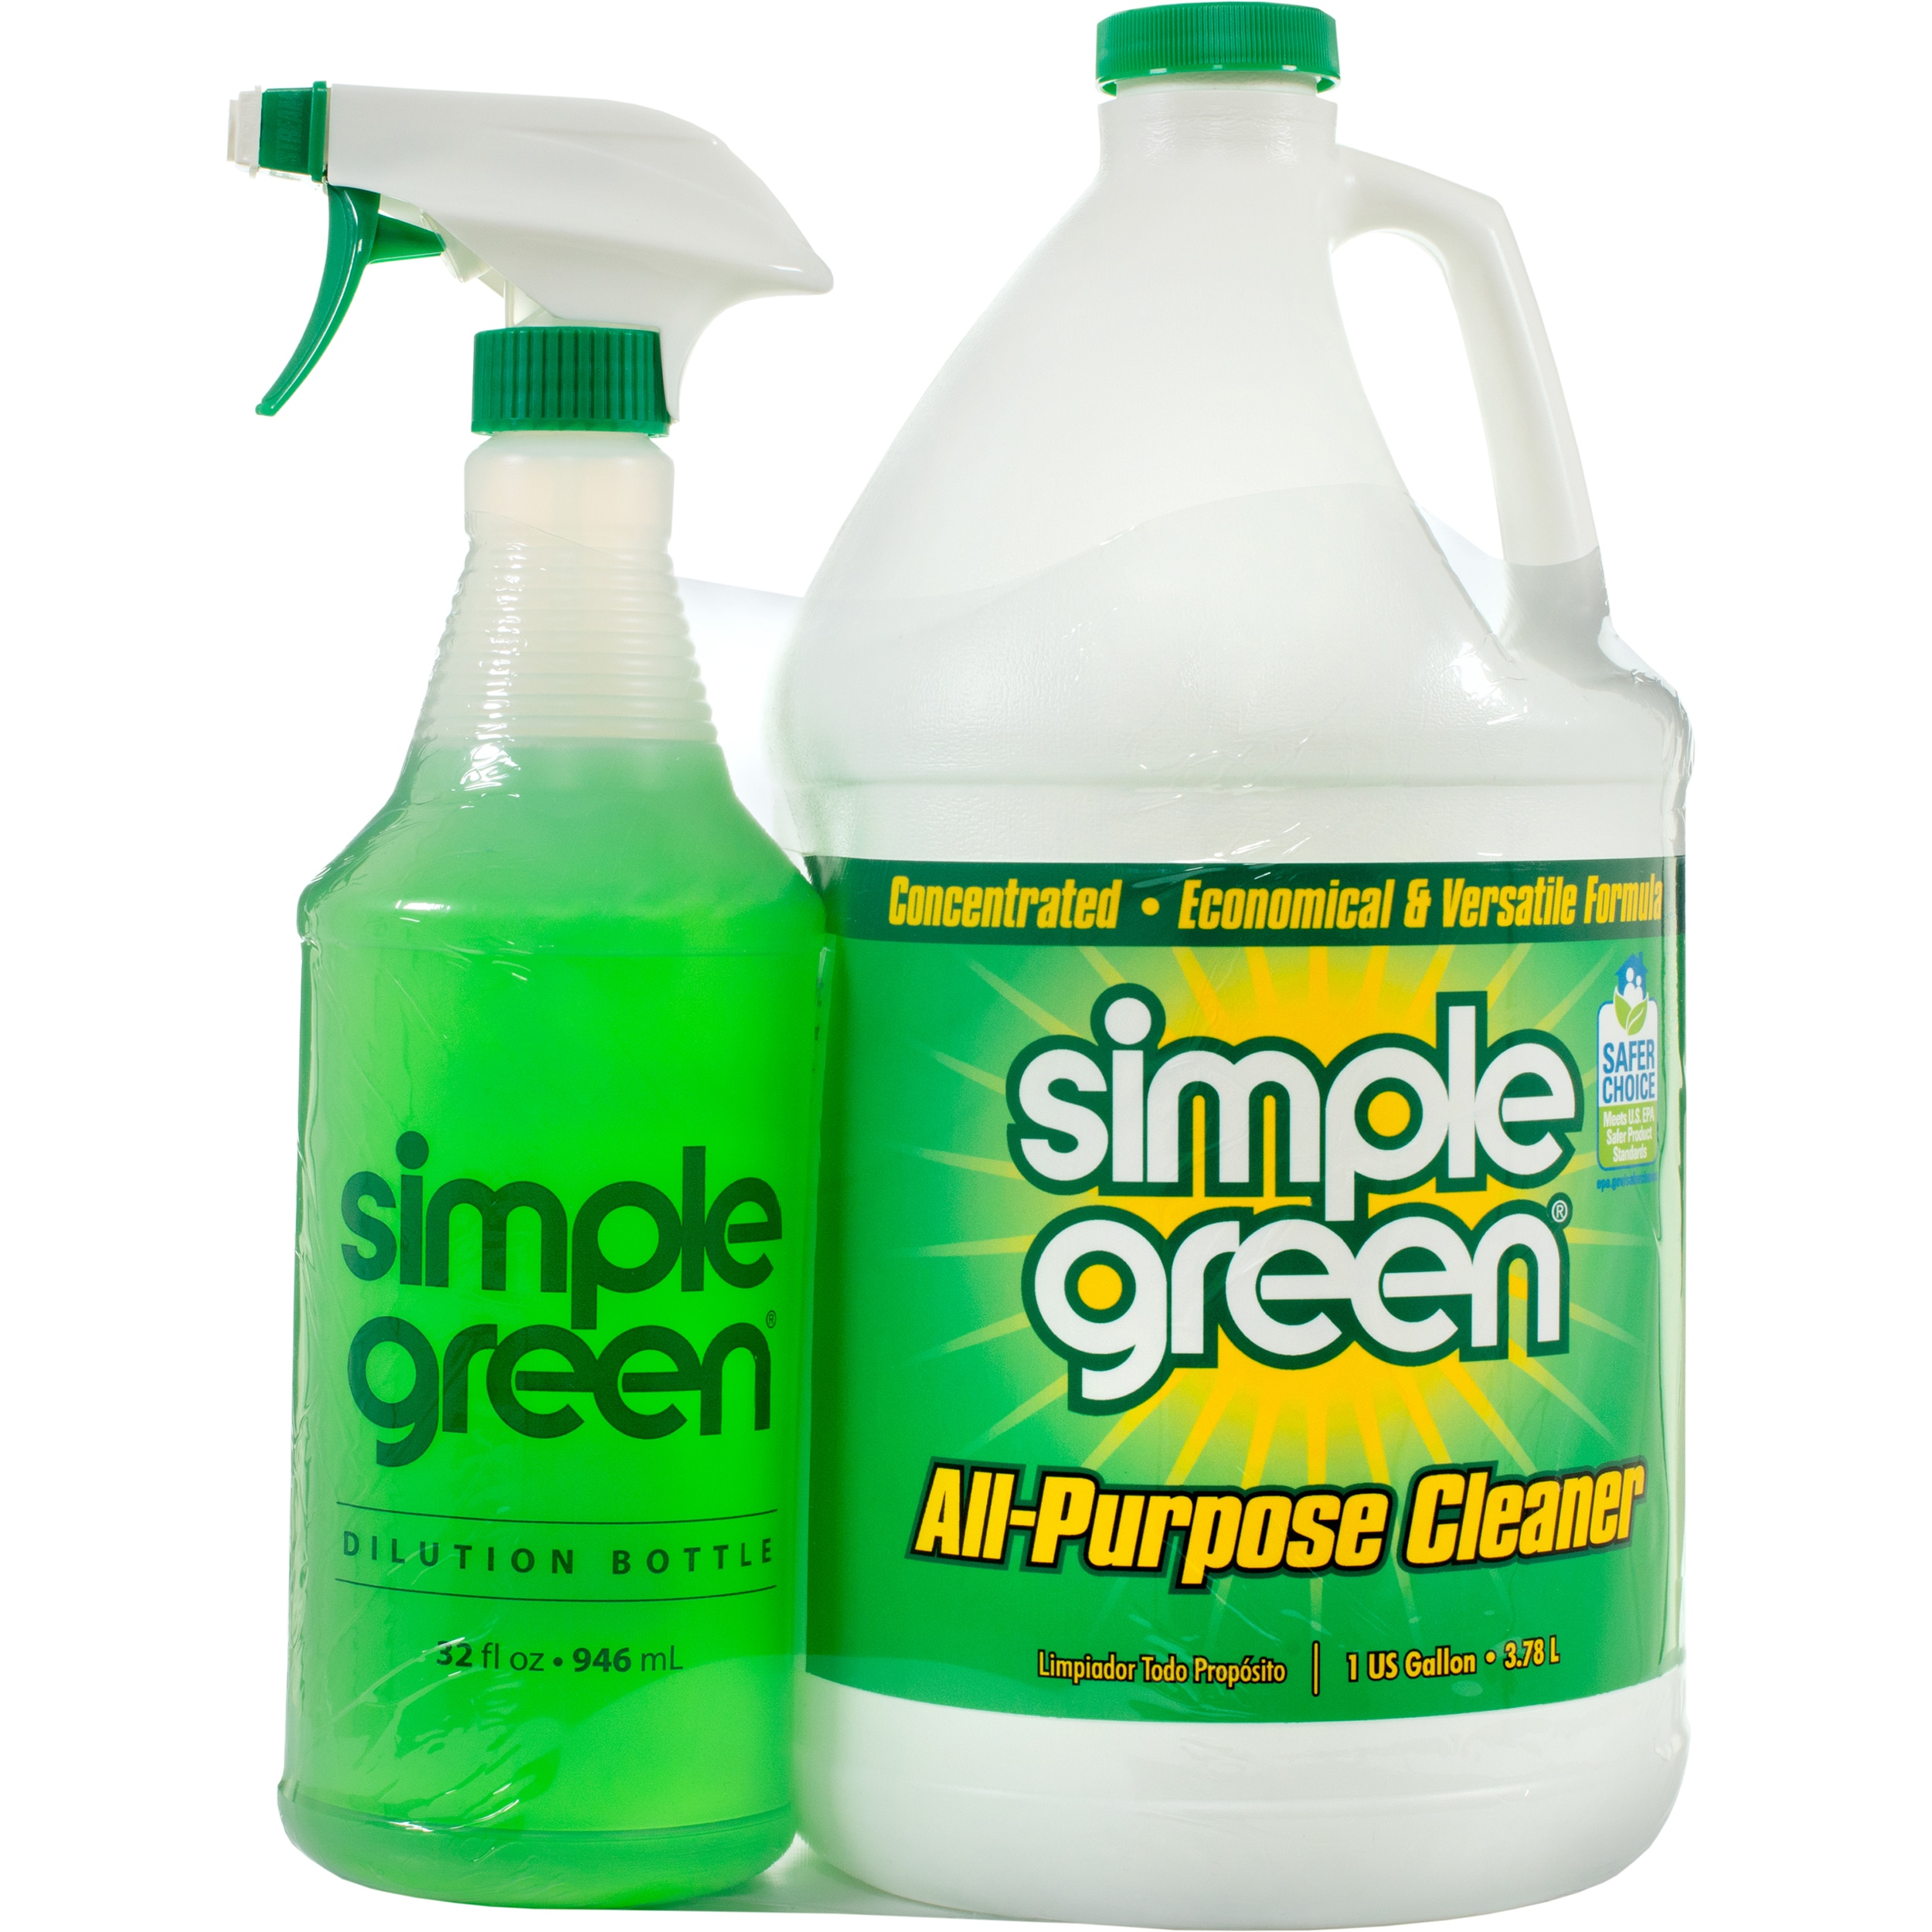 Green cleaning samples